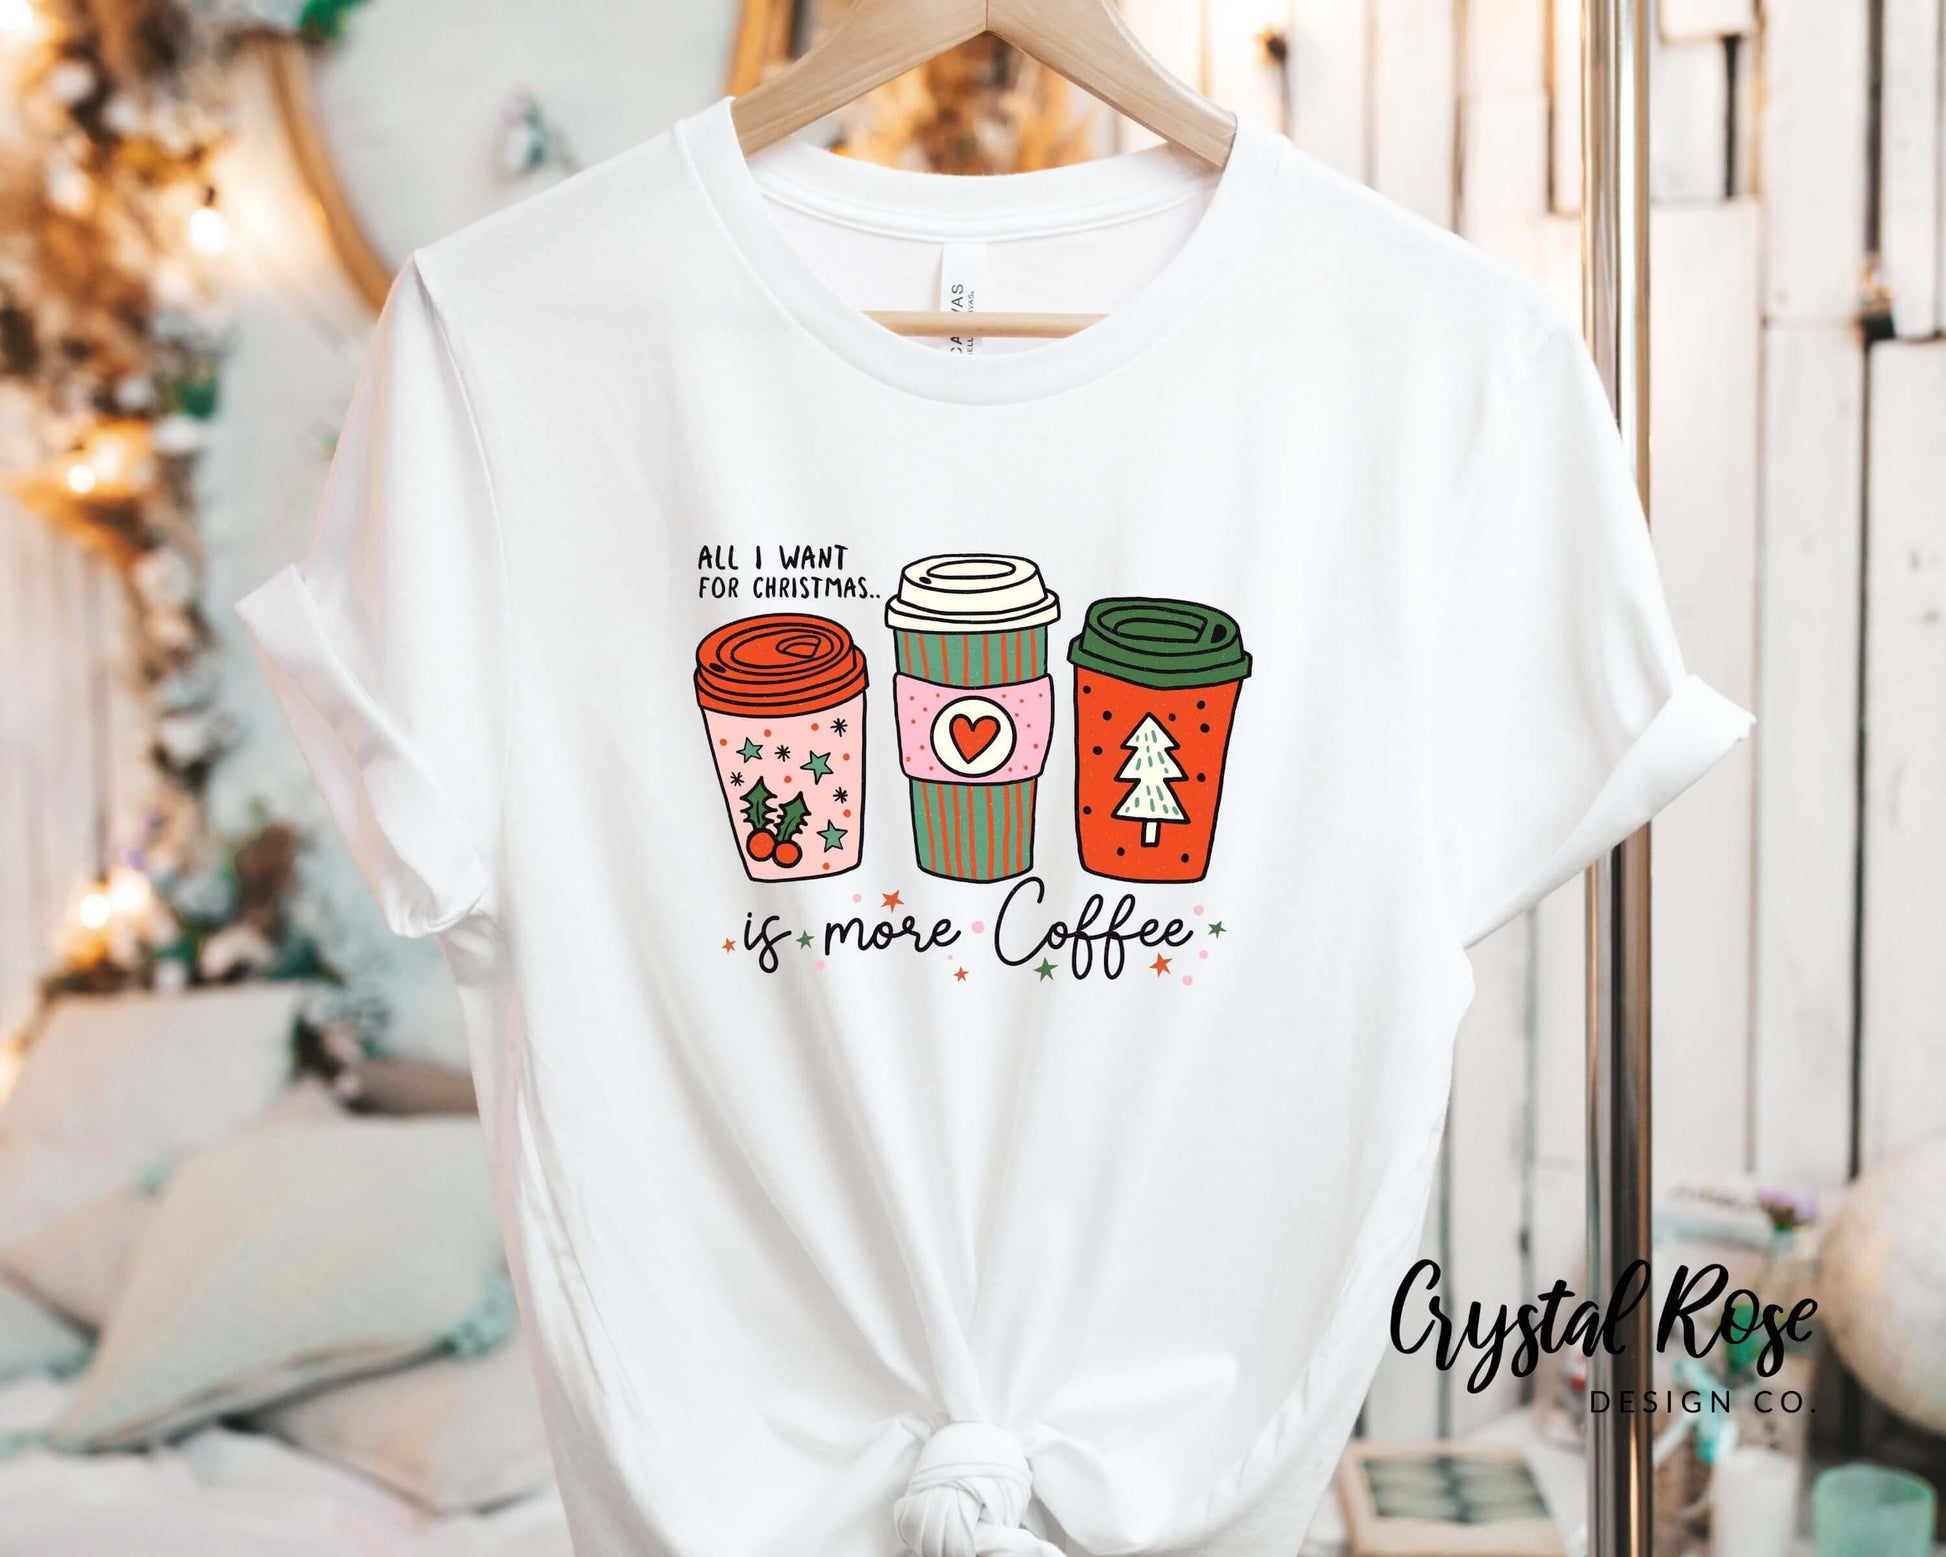 All I Want For Christmas Is More Coffee Christmas Shirt Short Sleeve Tee - Crystal Rose Design Co.